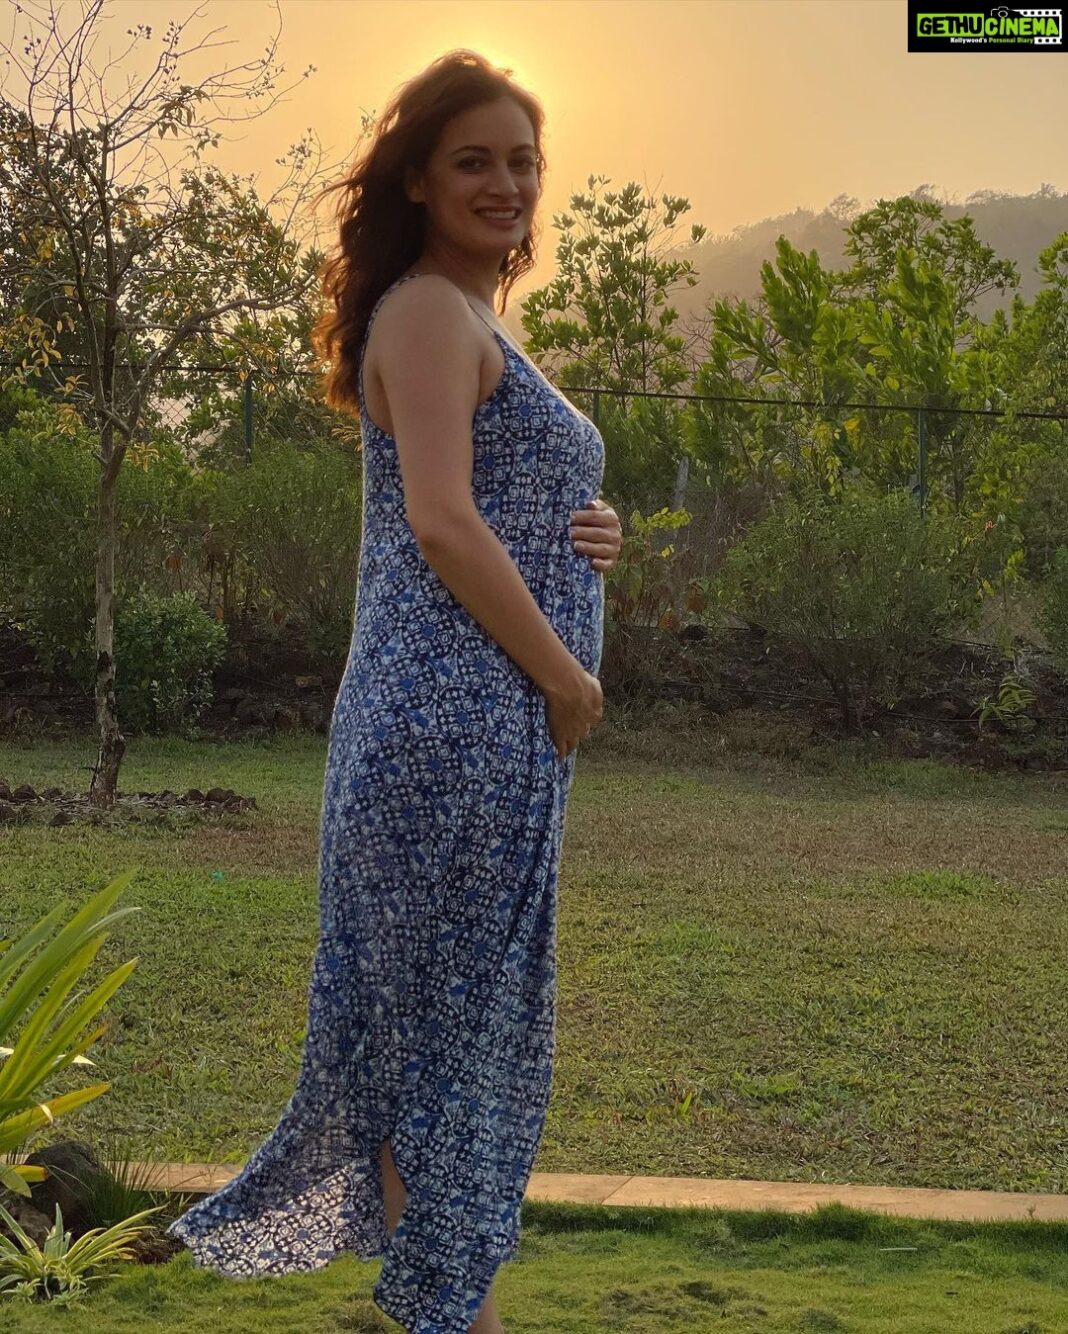 Dia Mirza Instagram - Becoming a mother is the best gift nature gave me 💚 Every moment has been filled with light and joy! From the time i first discovered i was pregnant, to every single moment since… natures force has revealed itself to me in the most magical ways. And no, it wasn’t easy going through the trauma of a extremely premature delivery and subsequent complications. But, the faith that you chose me Avyaan Azaad to be your mother was unshakable even when we went through our challenges. Thank you for choosing me my precious. Thank you for holding on so strong. Thank you for teaching me the power of love. You are love. #FlashbackFriday to a time when i was 4 months pregnant 🤰🌏 📸 Papa @vaibhav.rekhi #SunsetKeDiVane